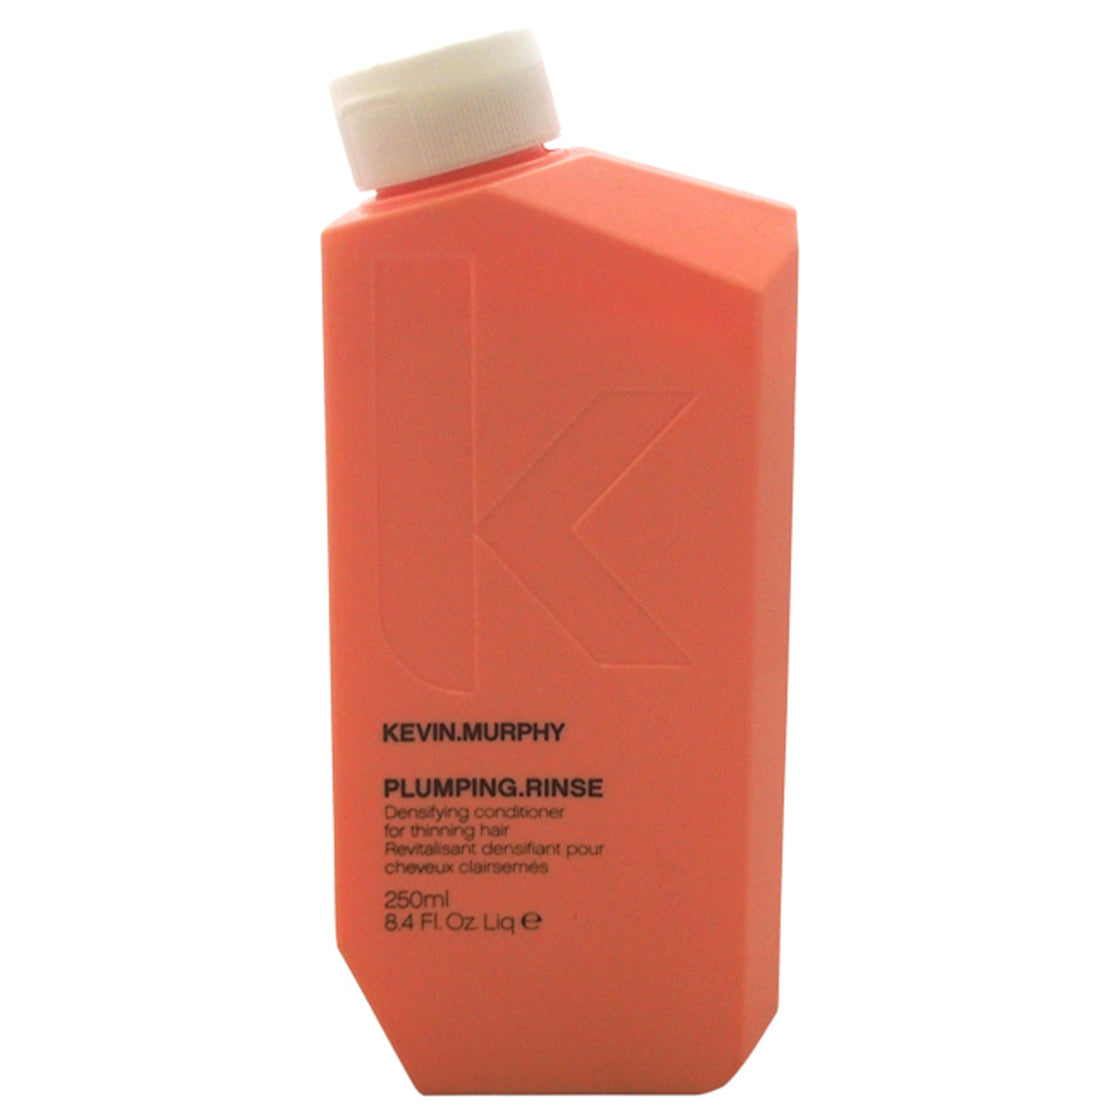 Plumping.Rinse by Kevin Murphy for Unisex - 8.4 oz Conditioner